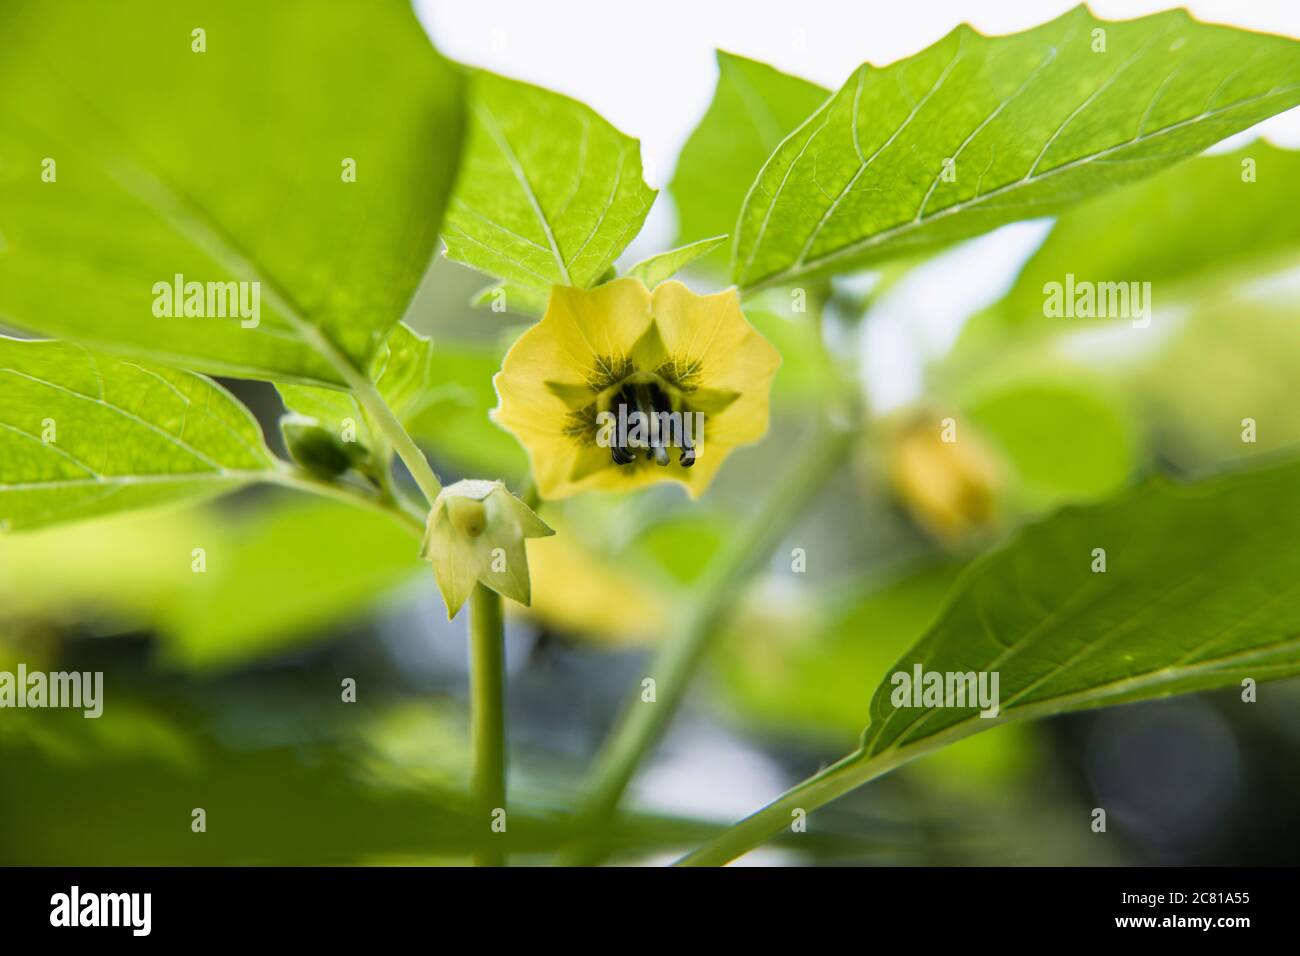 Closeup Tomatillo Blossom ready to be pollinated in a home garden Stock Photo